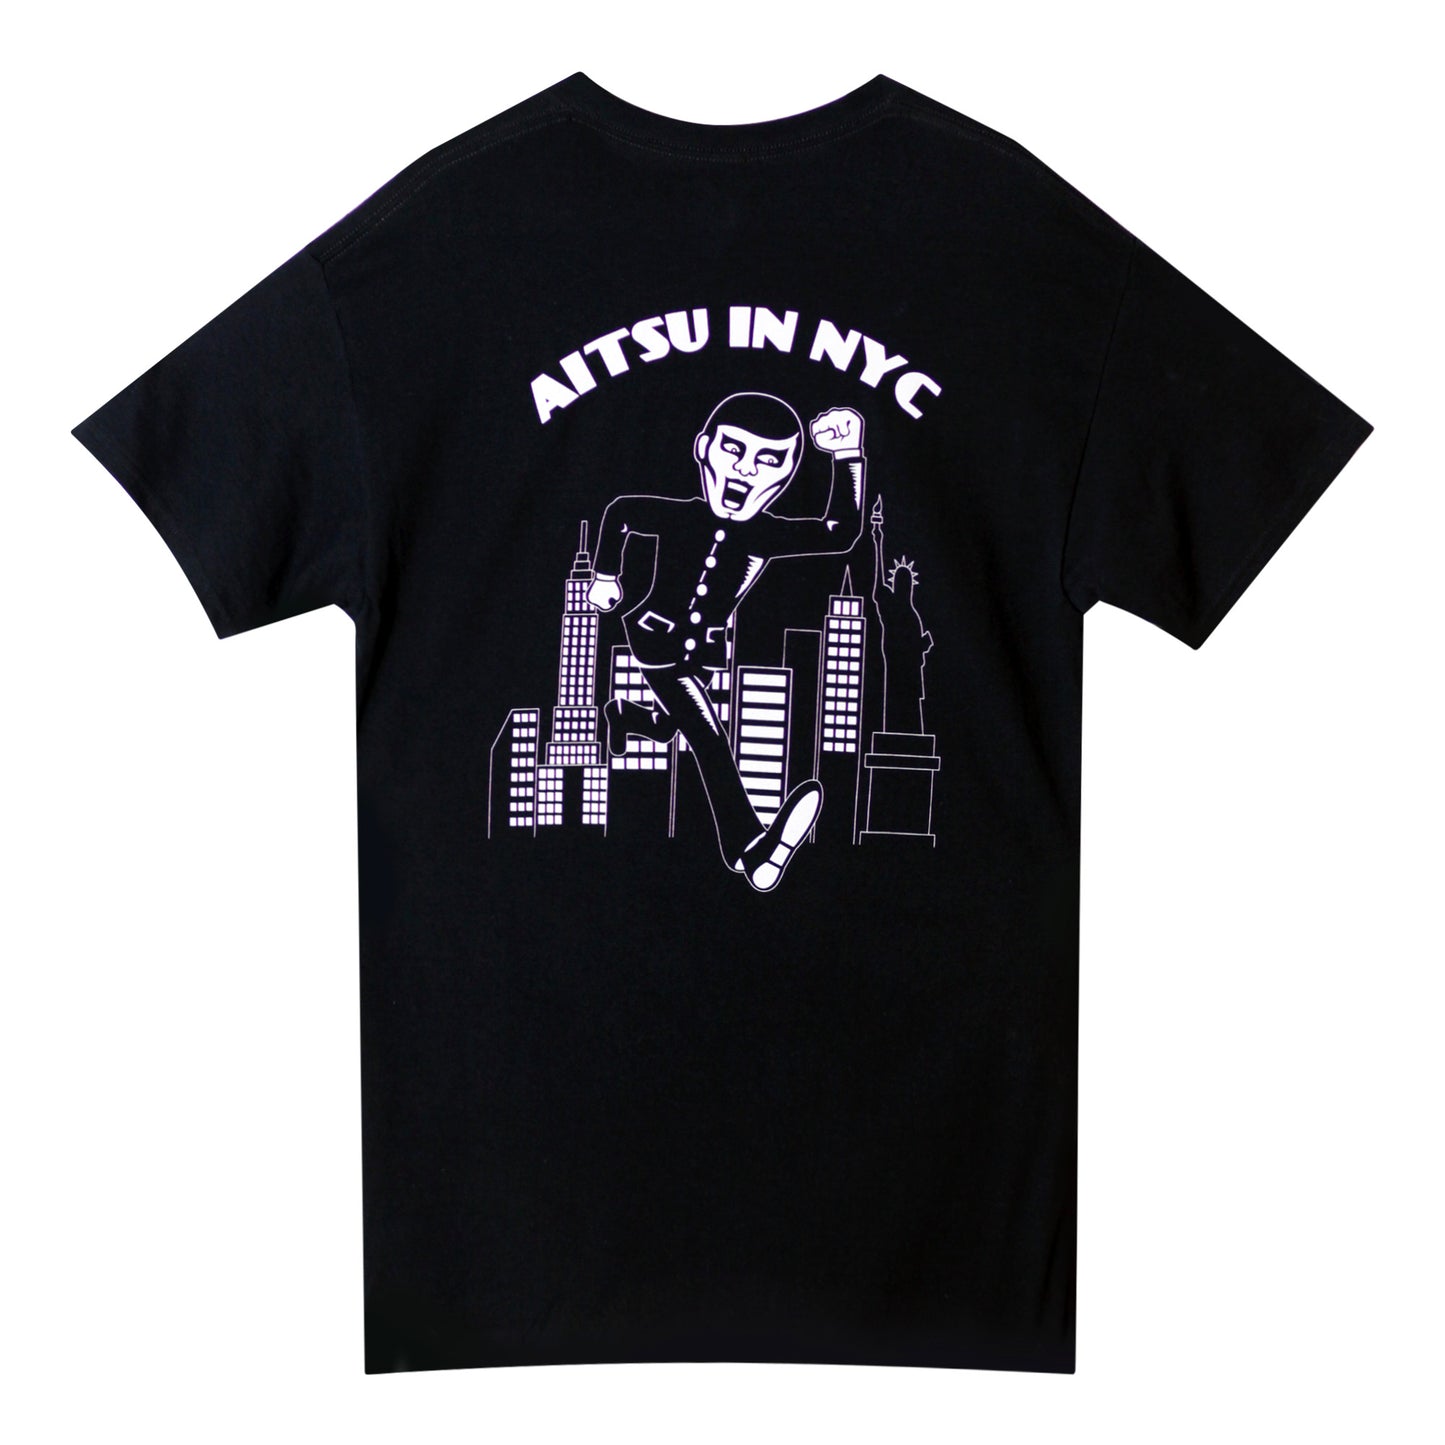 Punk Drunkers x Toy Tokyo - Aitsu in NYC T-Shirt (Black)